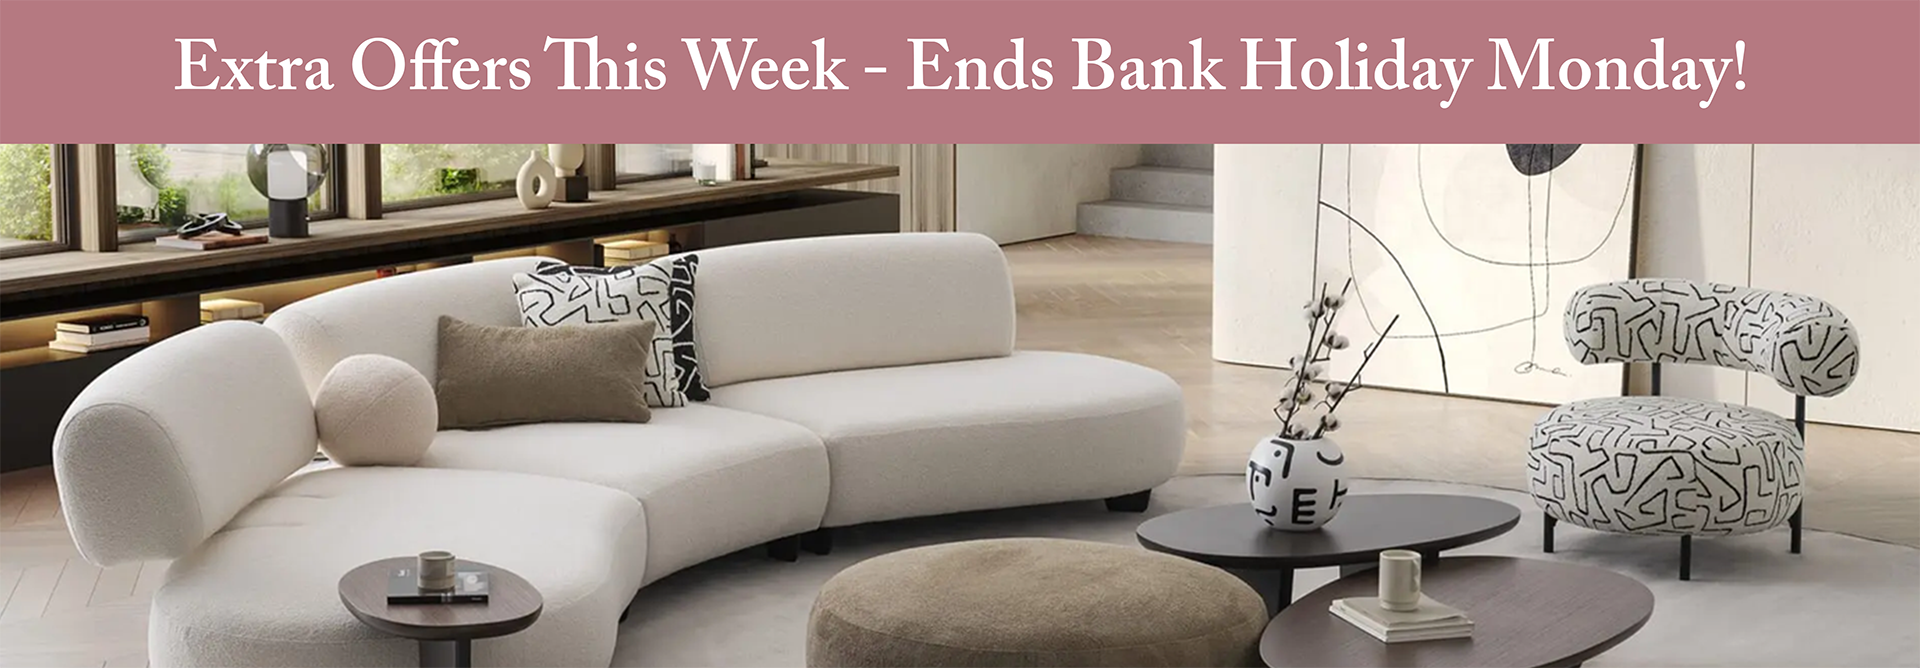 Extra Offers This Week - Ends Bank Holiday Monday